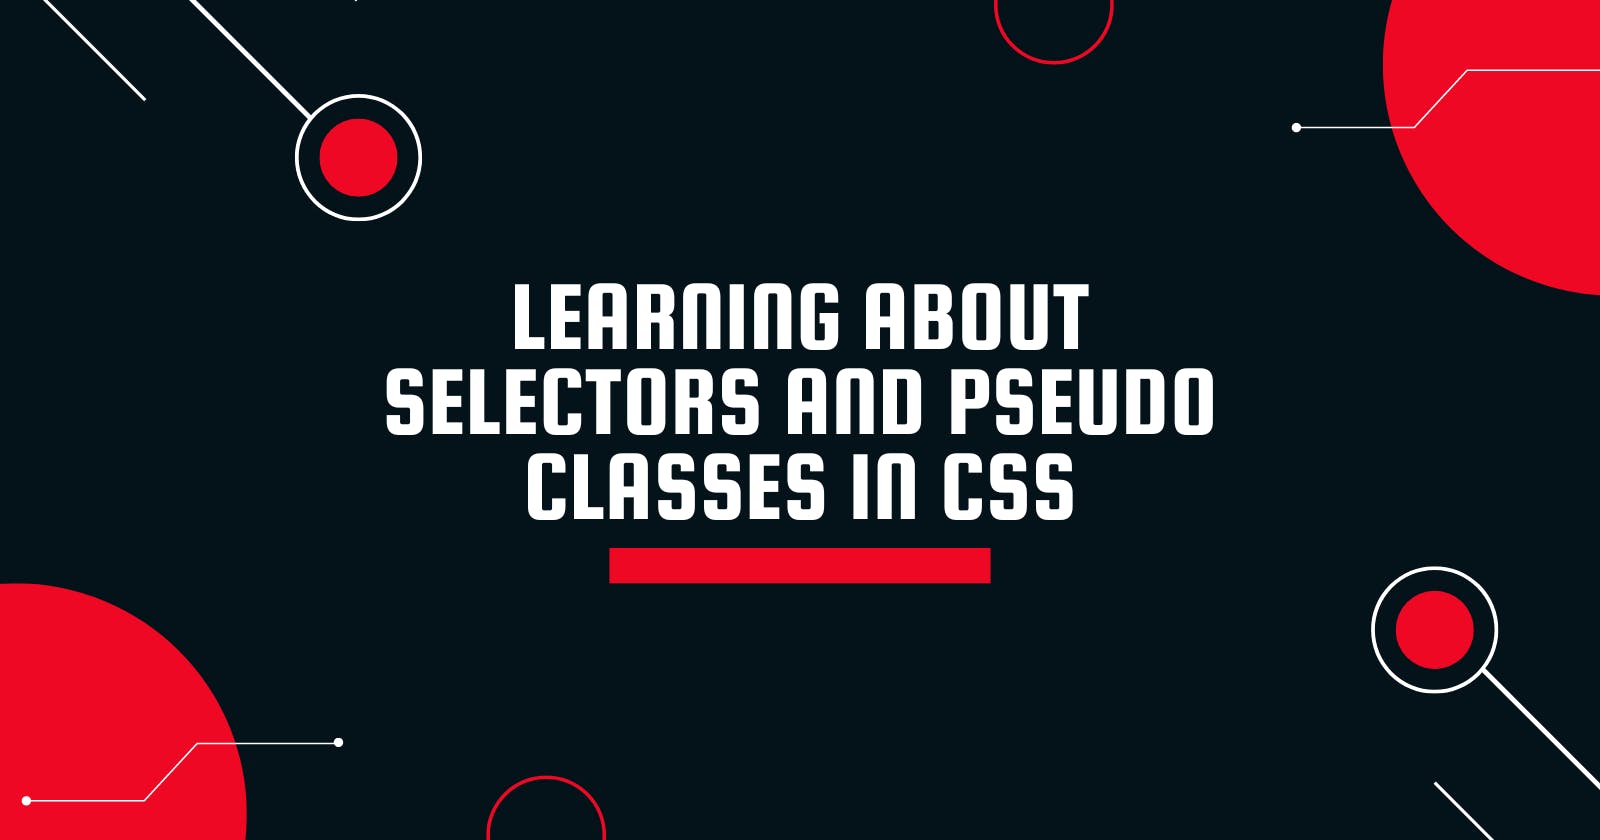 Learning about Selectors and Pseudo Classes in CSS